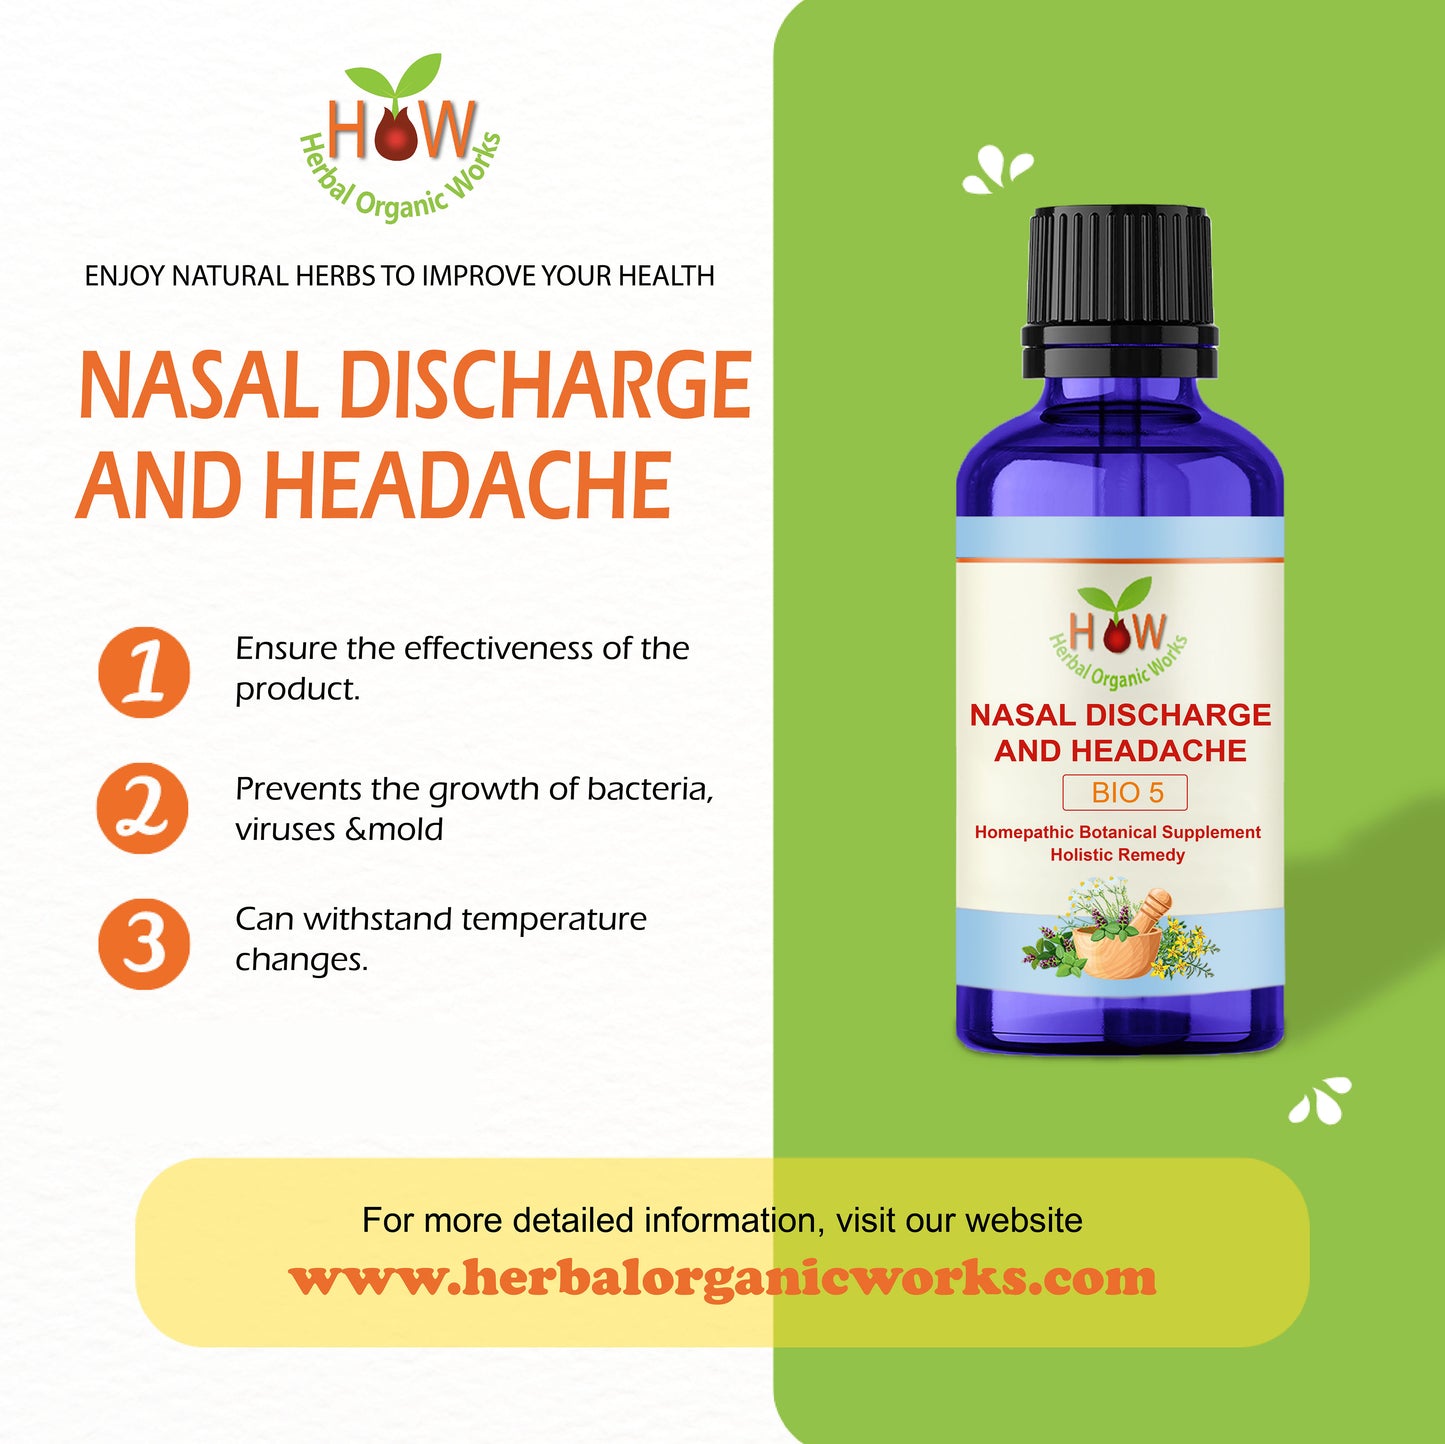 NASAL DISCHARGE AND HEADACHE TABLETS (BIO5)